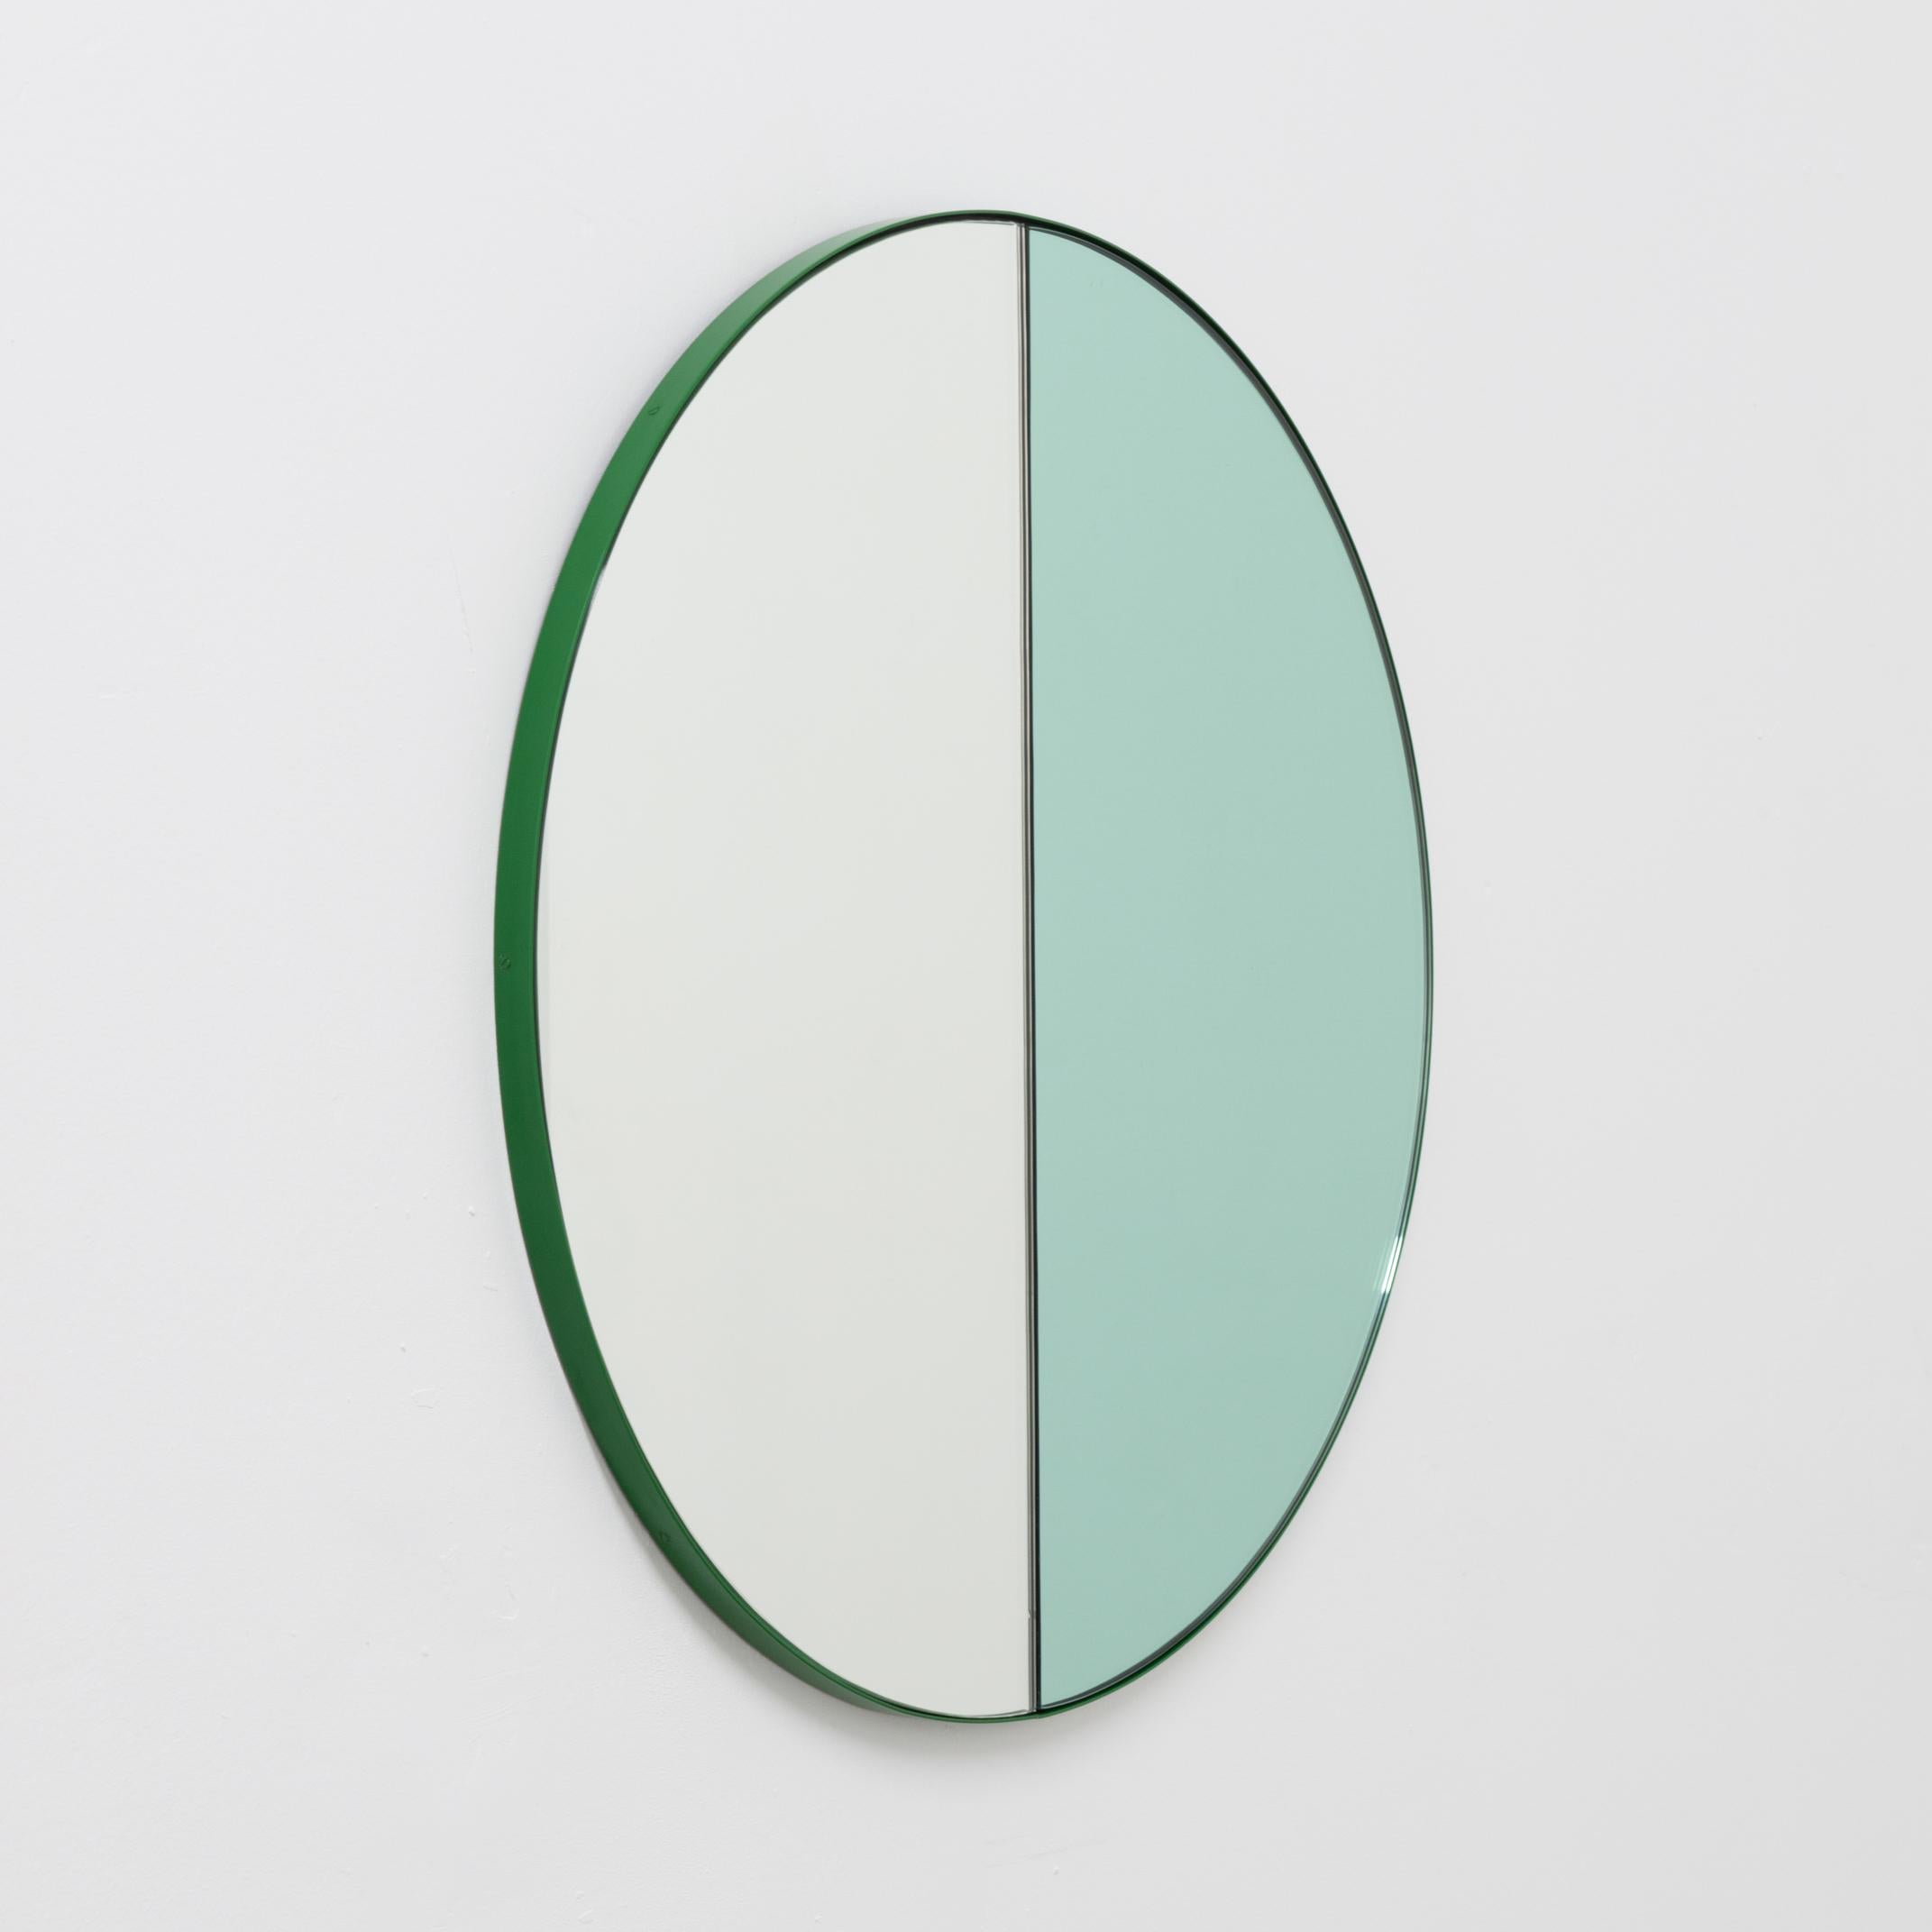 Contemporary mixed tinted (silver + green) Orbis Dualis™ mirror with a modern green frame. Designed and handcrafted in London, UK.

Supplied fully fitted with a specialist hanging system that allows the mirror to be hung in four different